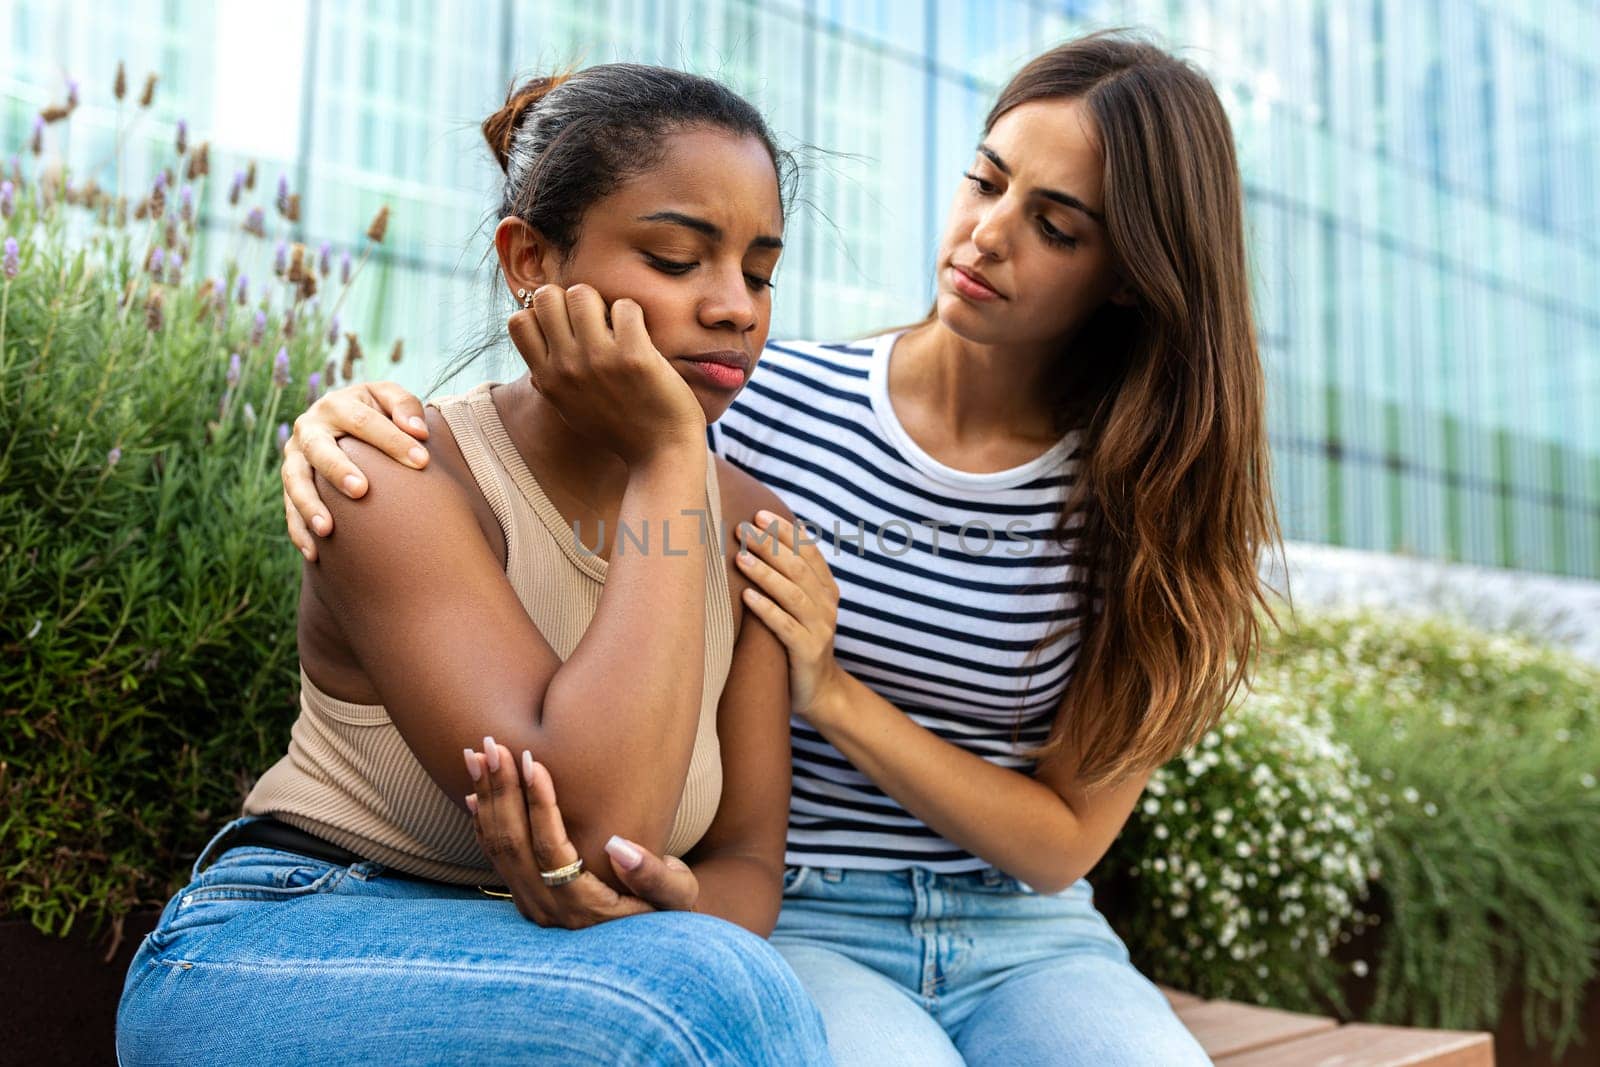 Young woman consoling and comforting upset and depressed African American female friend in park outdoors. by Hoverstock